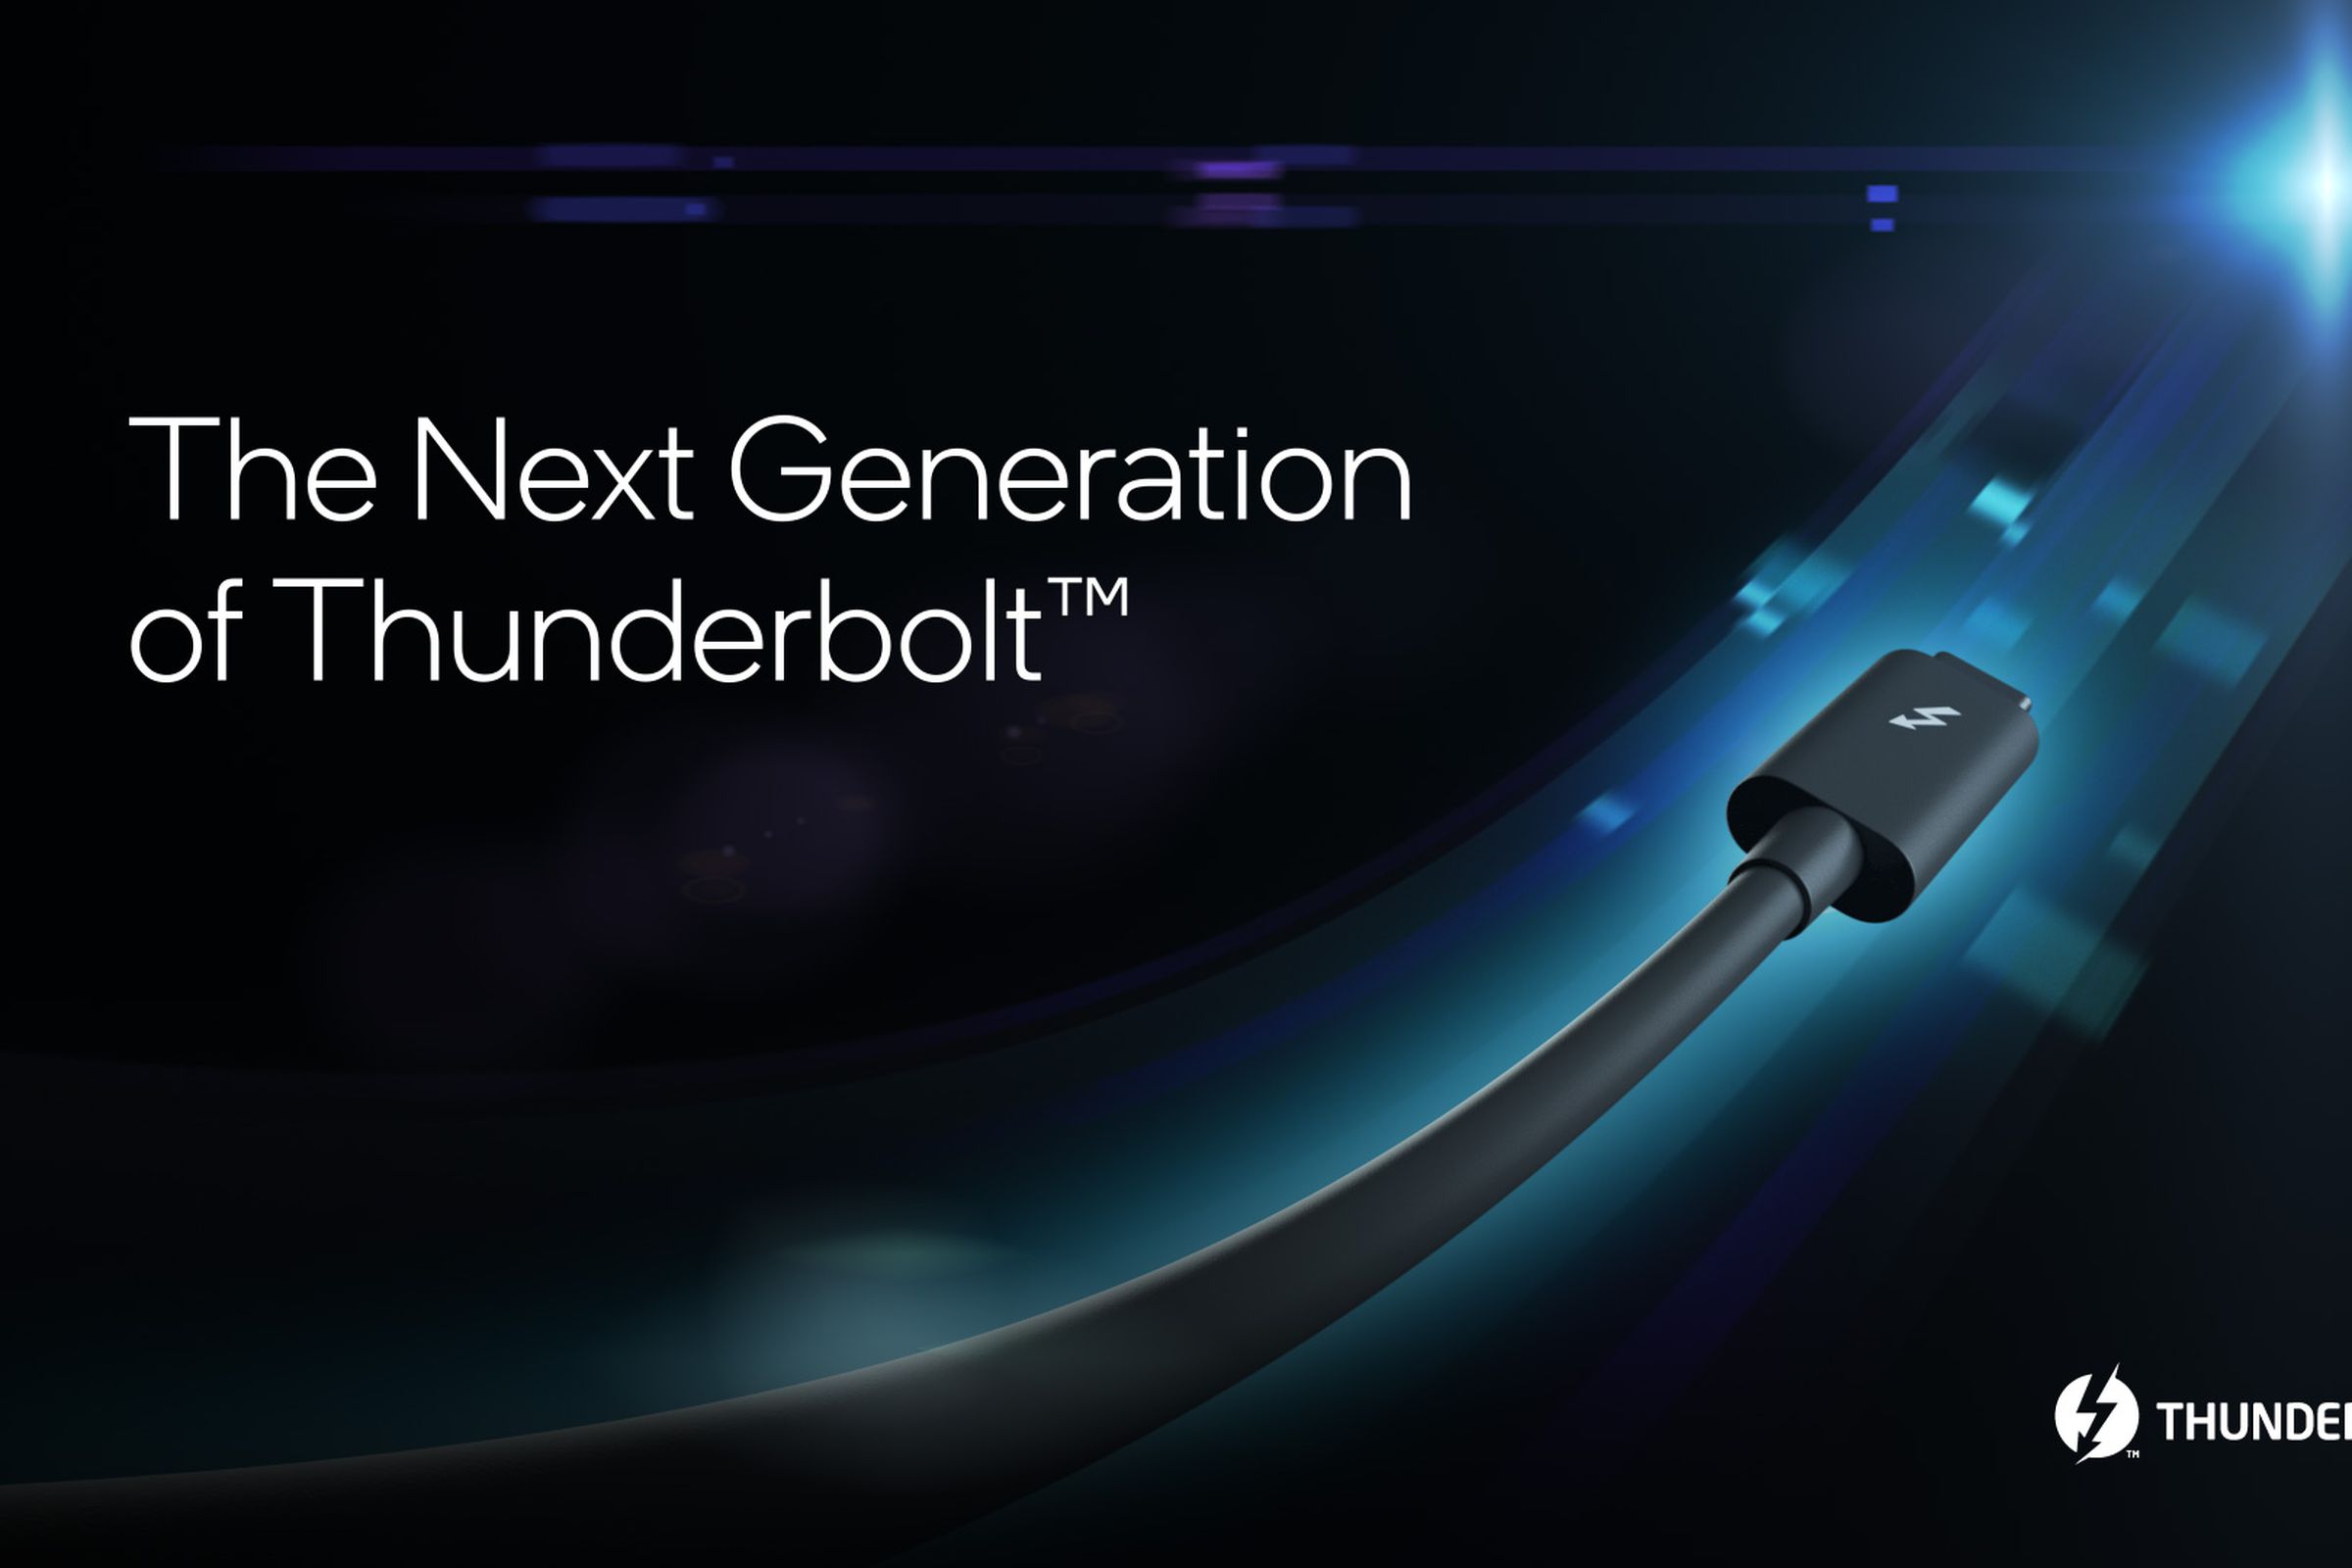 Illustration of a Thunderbolt cable, with the label “the next generation of Thunderbolt.”